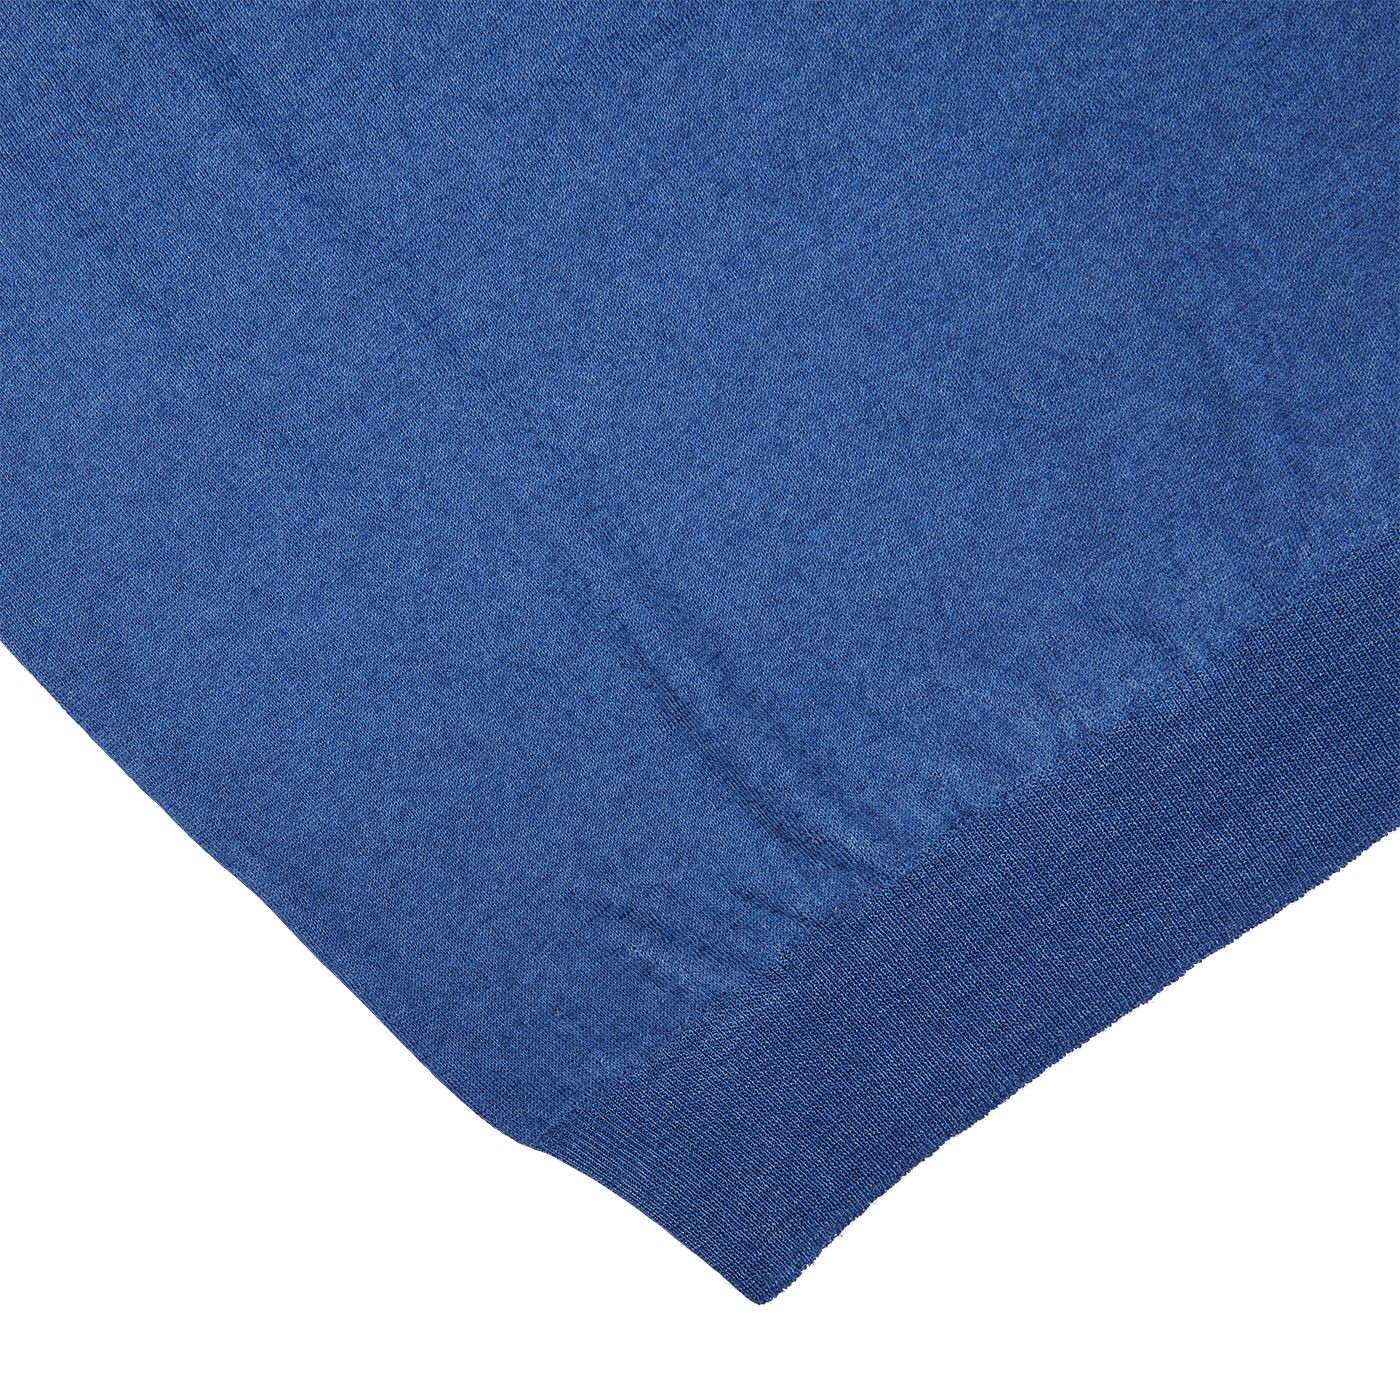 A close up of a Indigo Blue Vintage Merino Wool 1/4 Zip Sweater bed sheet by Gran Sasso.